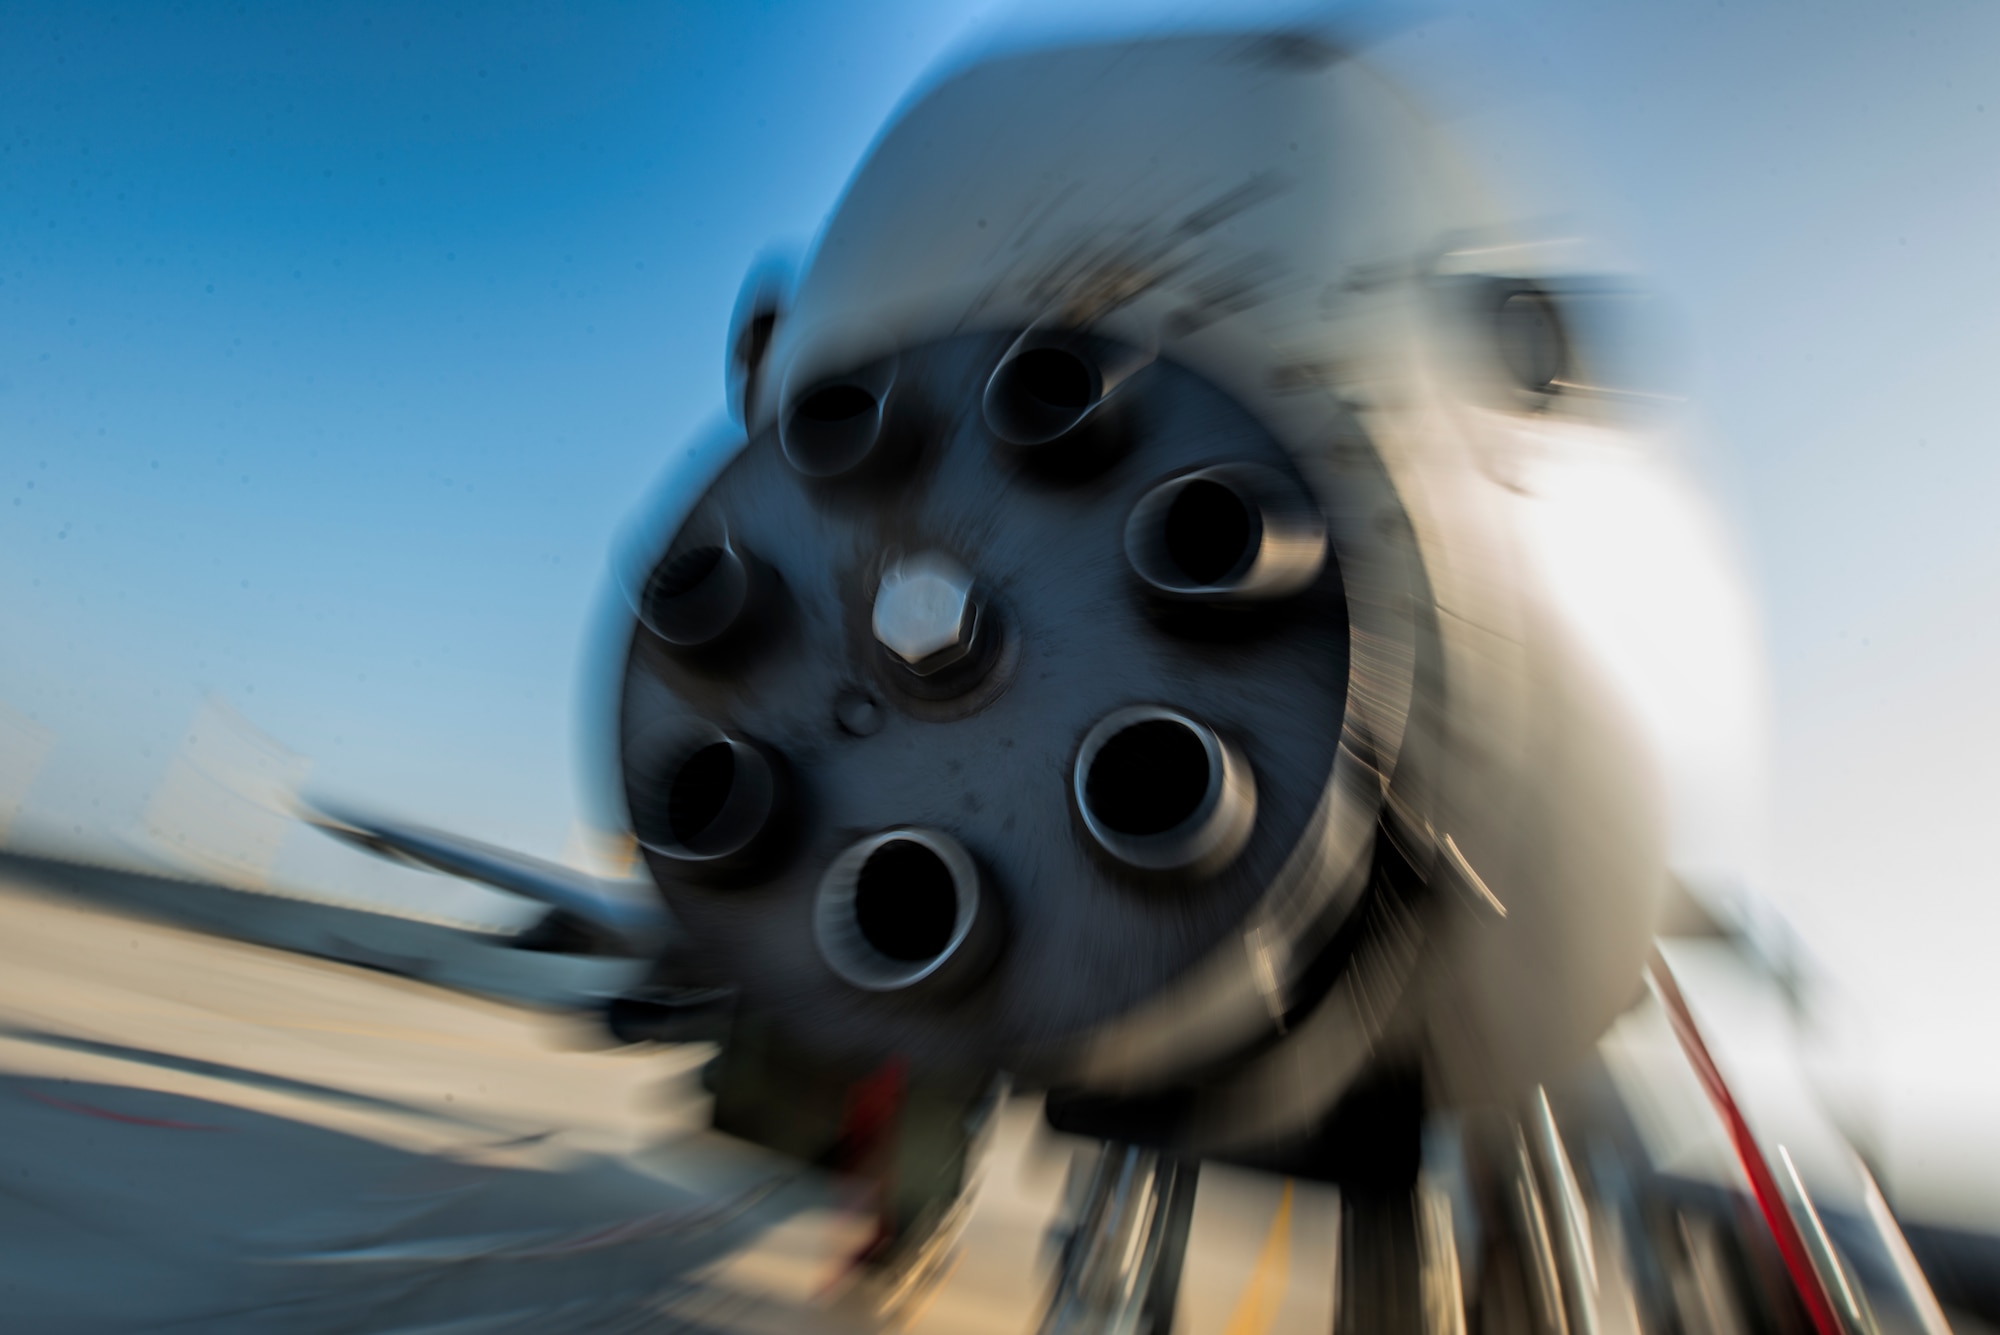 A 30mm GAU-8 Avenger rotary cannon of a U.S. Air Force A-10 Thunderbolt II attack aircraft assigned to the 354th Expeditionary Fighter Squadron is displayed during a theater security package deployment at Namest Air Base, Czech Republic, April 15, 2015. The A-10 supports Air Force missions around the world as part of the U.S. Air Force's current inventory of strike platforms, including the F-15 Strike Eagle and the F-16 Fighting Falcon fighter aircraft. (U.S. Air Force photo by Staff Sgt. Christopher Ruano/Released/Released)